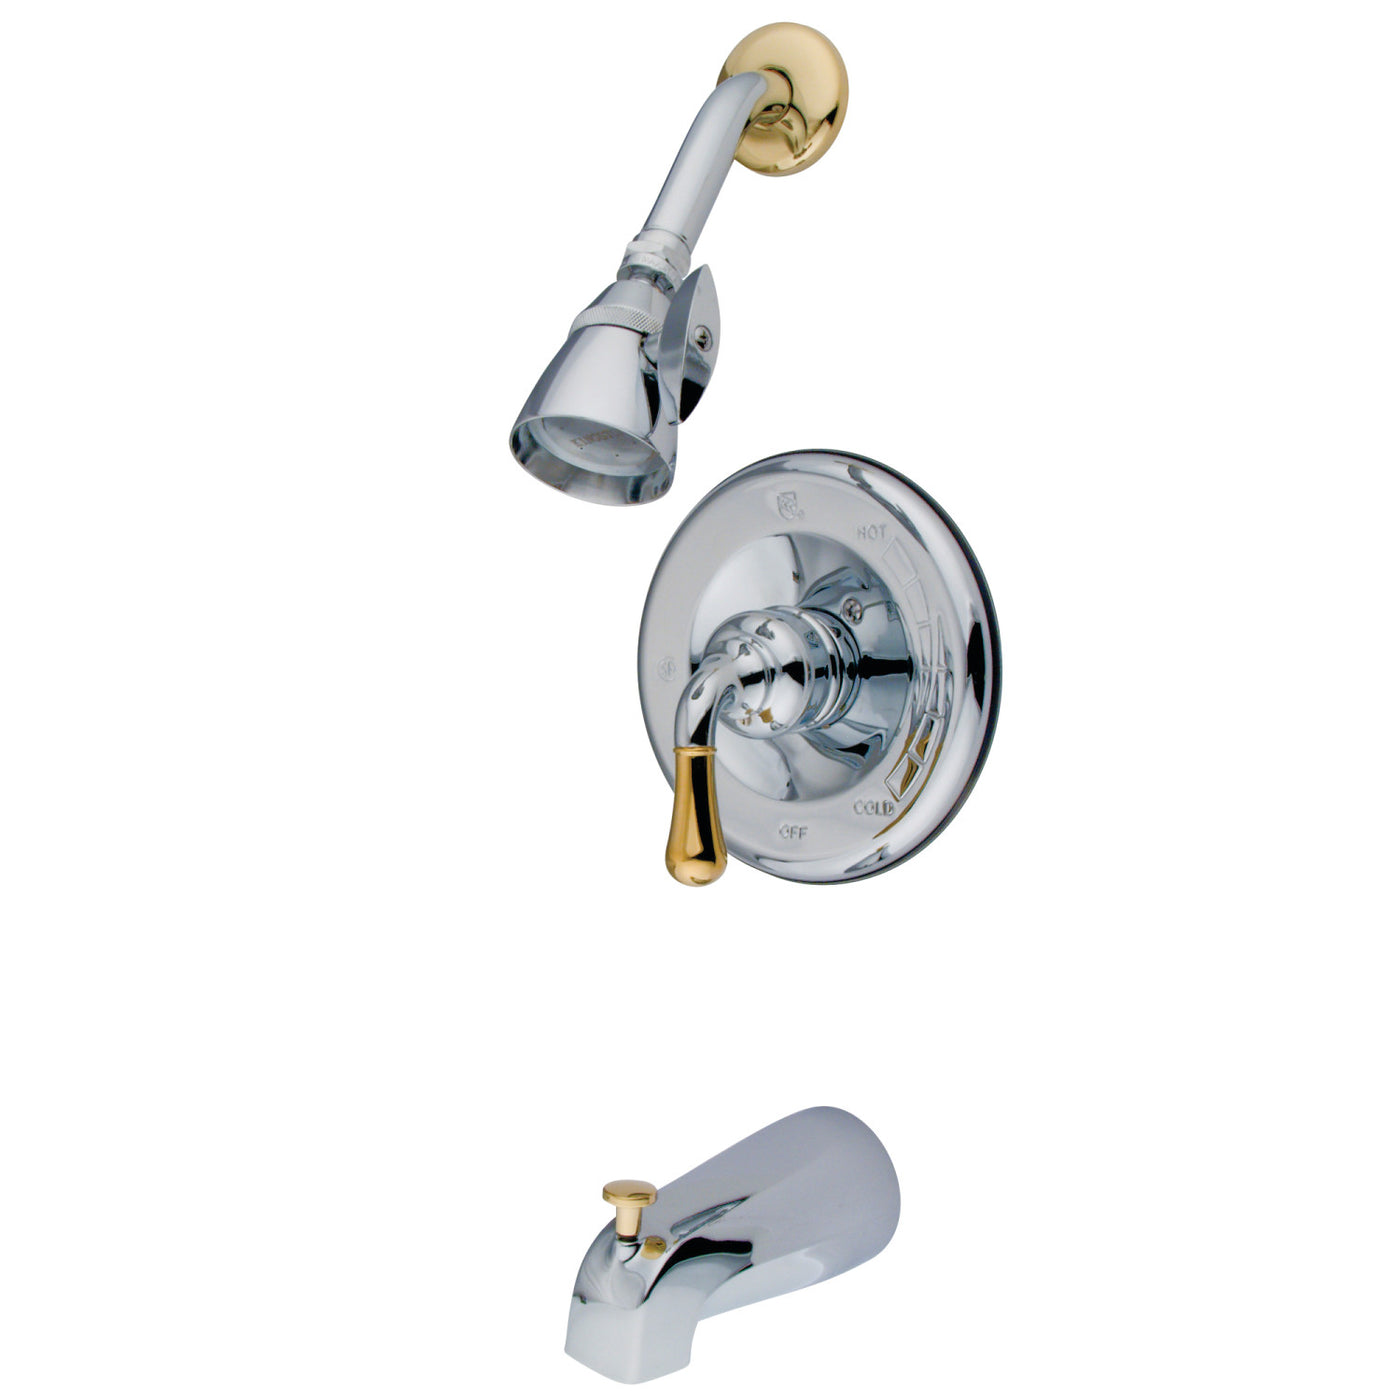 Elements of Design EB1634T Tub and Shower Faucet, Trim Only, Polished Chrome/Polished Brass